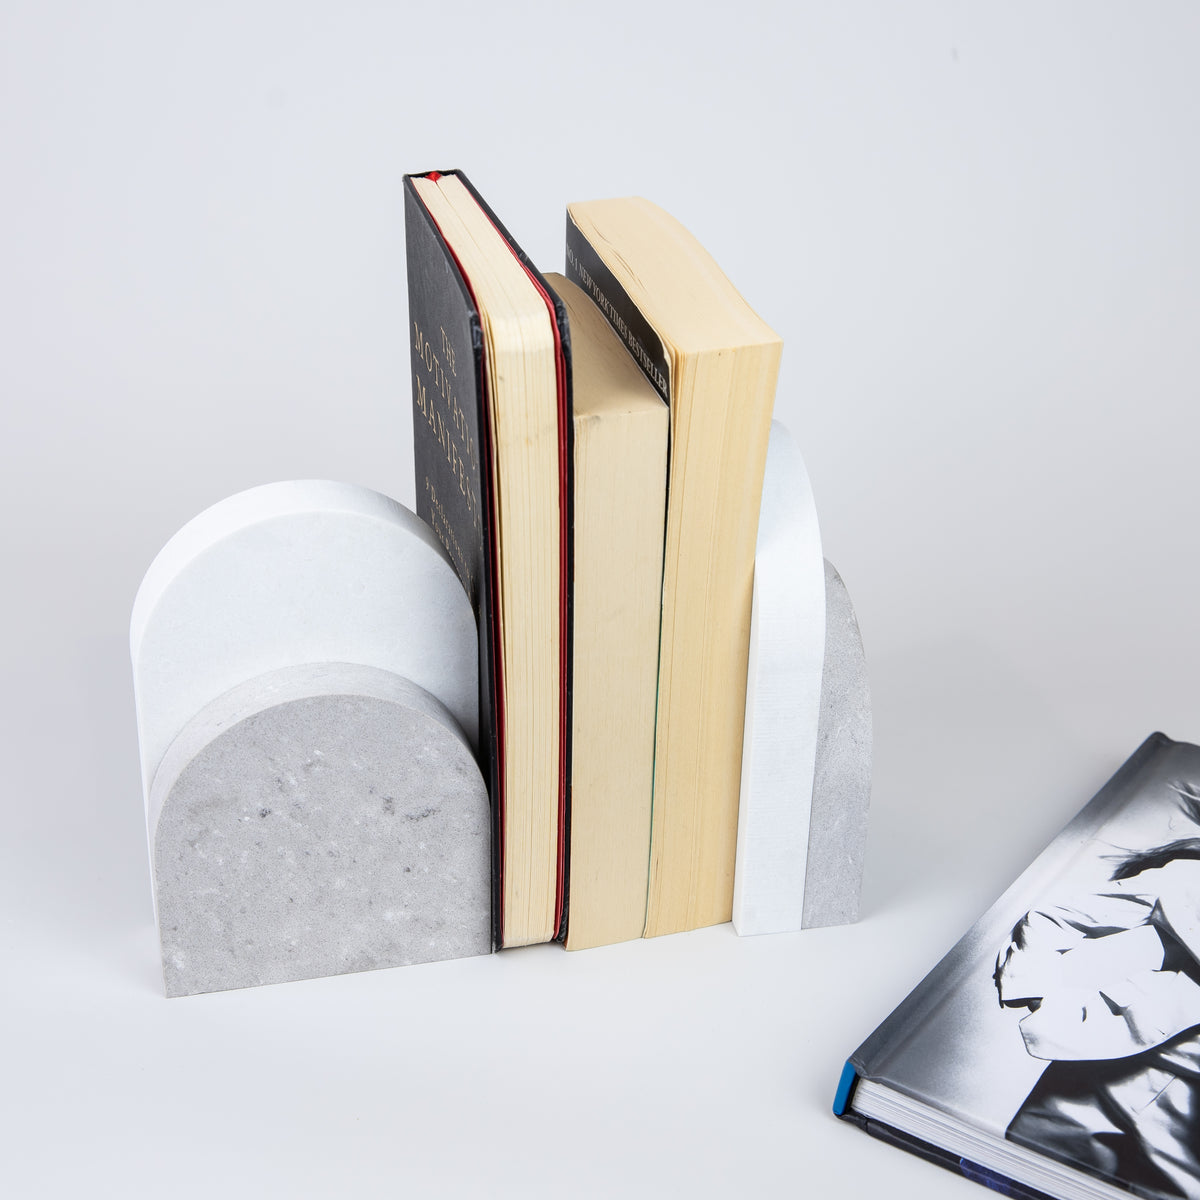 Quartz Bookend Set is 4cm thick. Styled with books. Available in Clamshell partnered with Organic White by Caesarstone  a beautiful fusion of light grey with white features, underscored by drifting veins on a neutral base, meets a clean white surface with subtly blended undertones, reflecting a natural appearance that is effortlessly chic. The perfect addition to your home decor, similar to marble bookends.